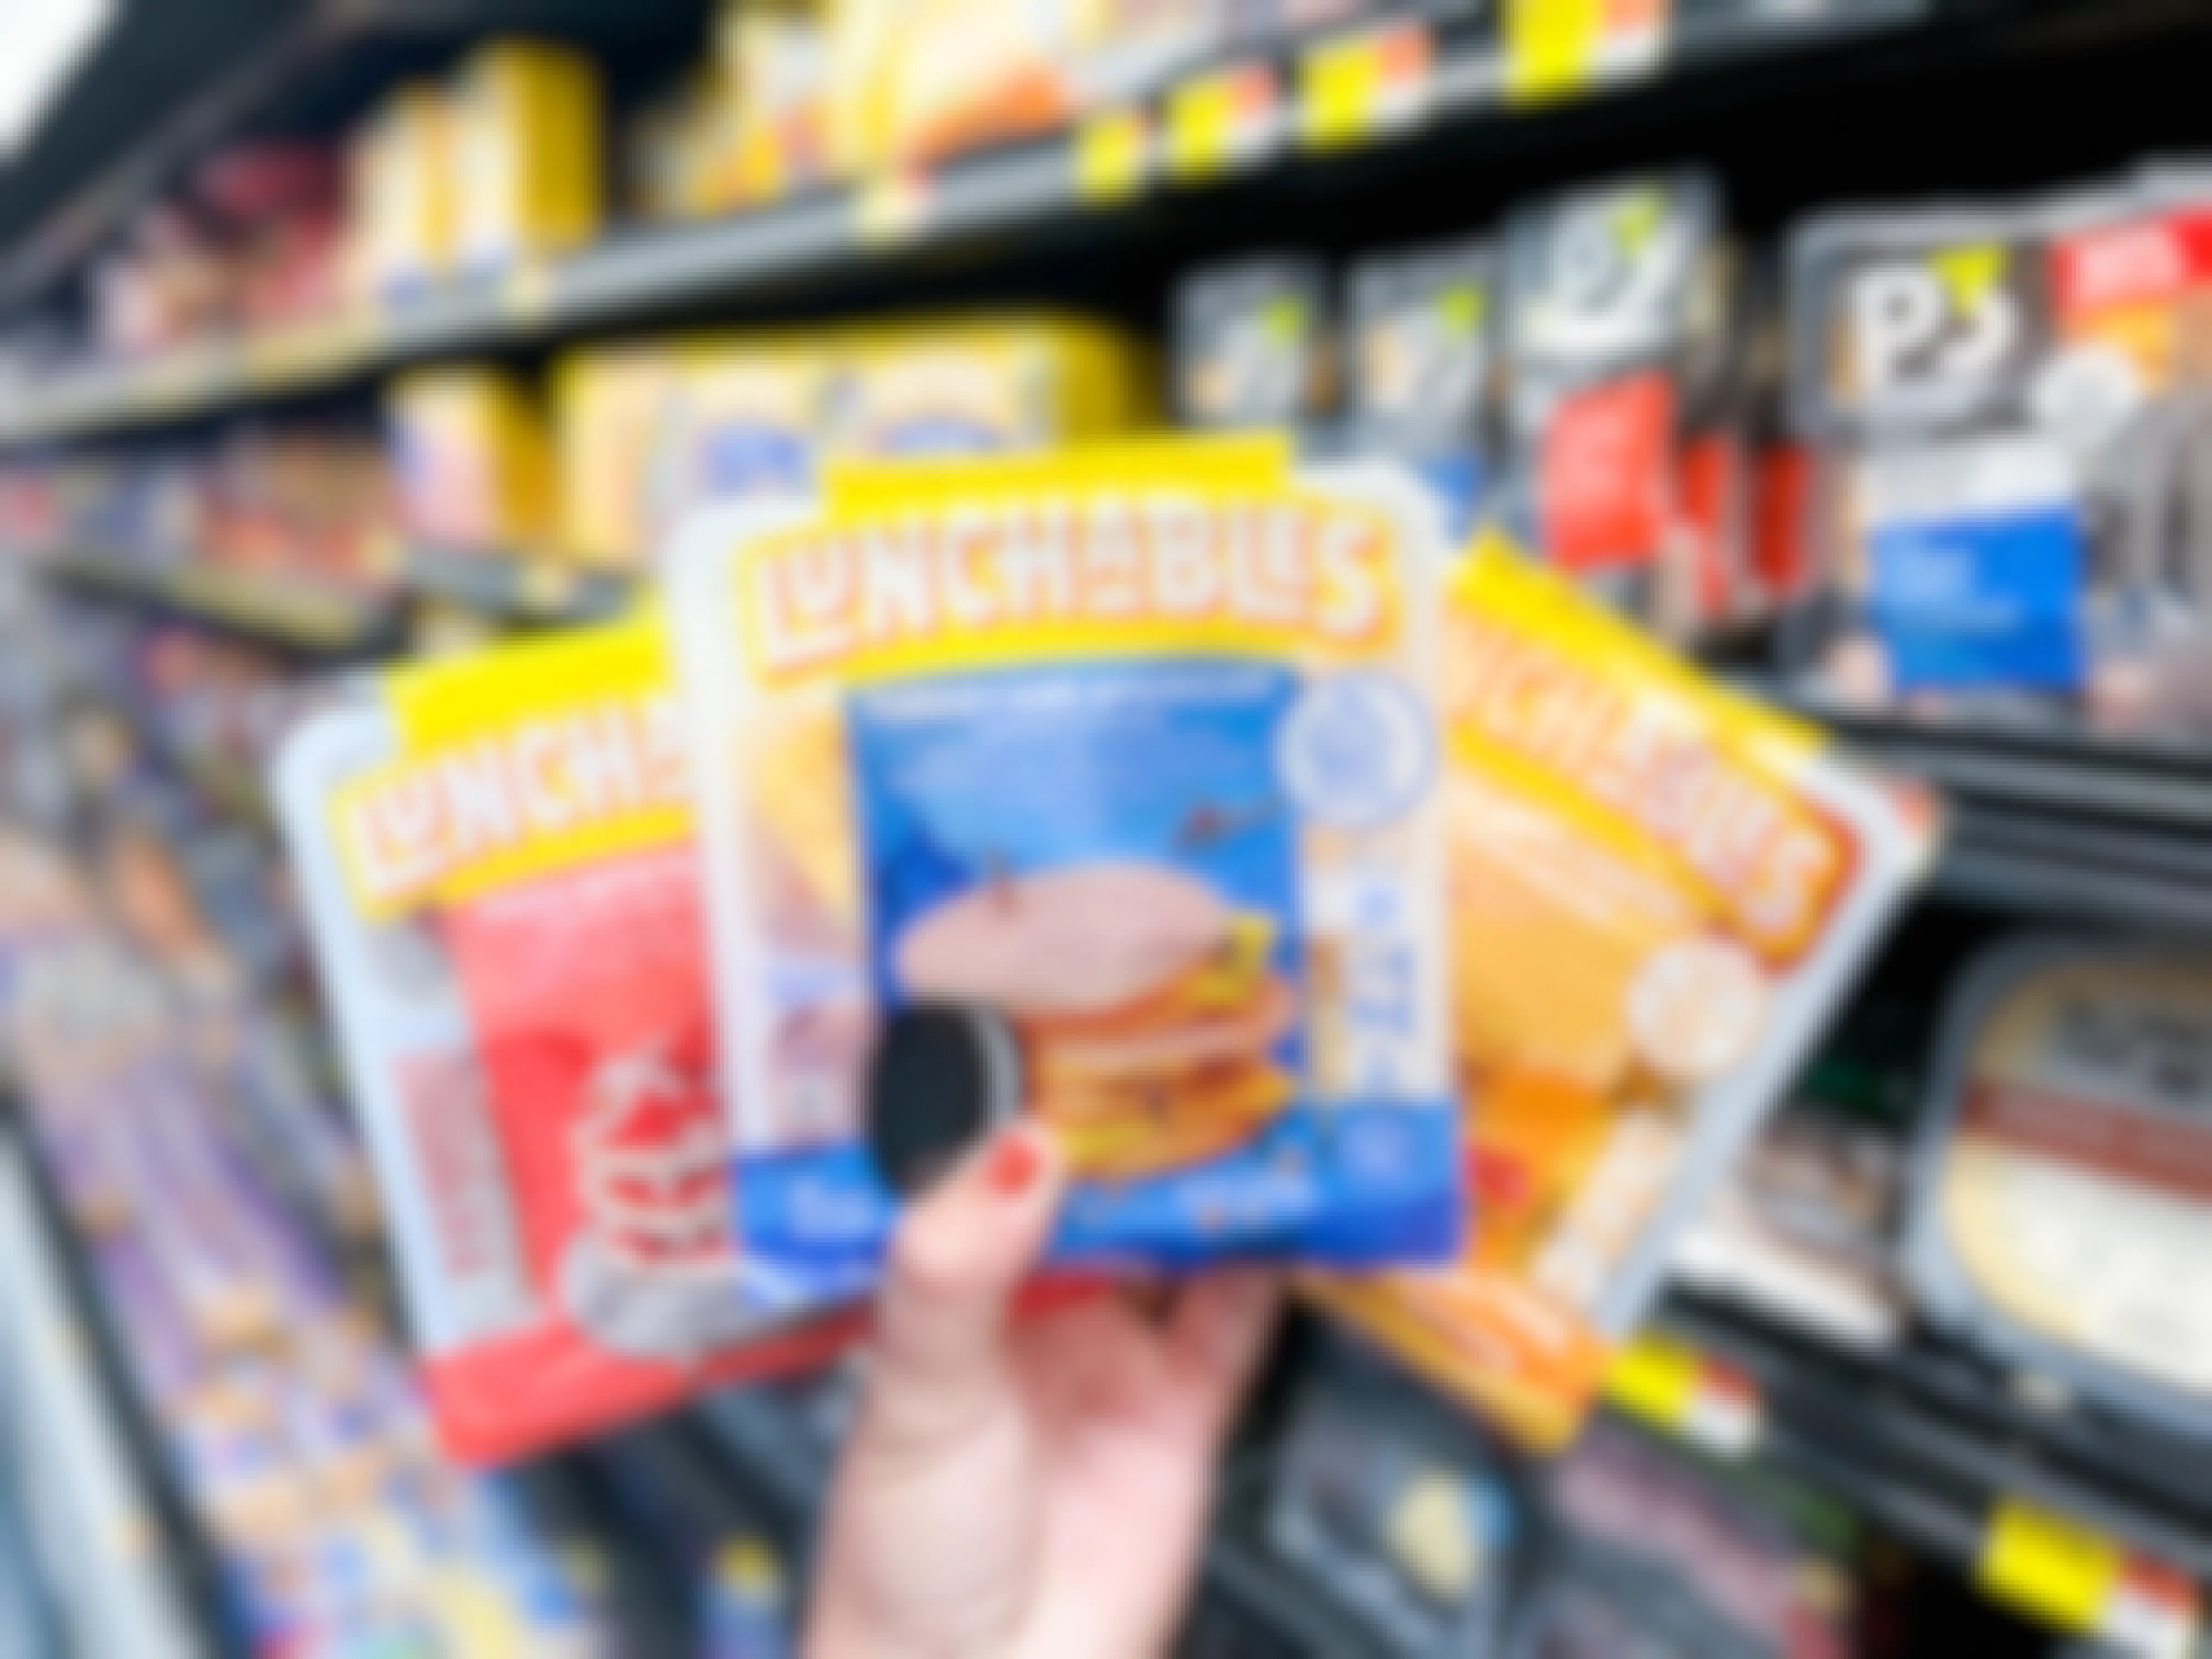 lunchables being held up in store 